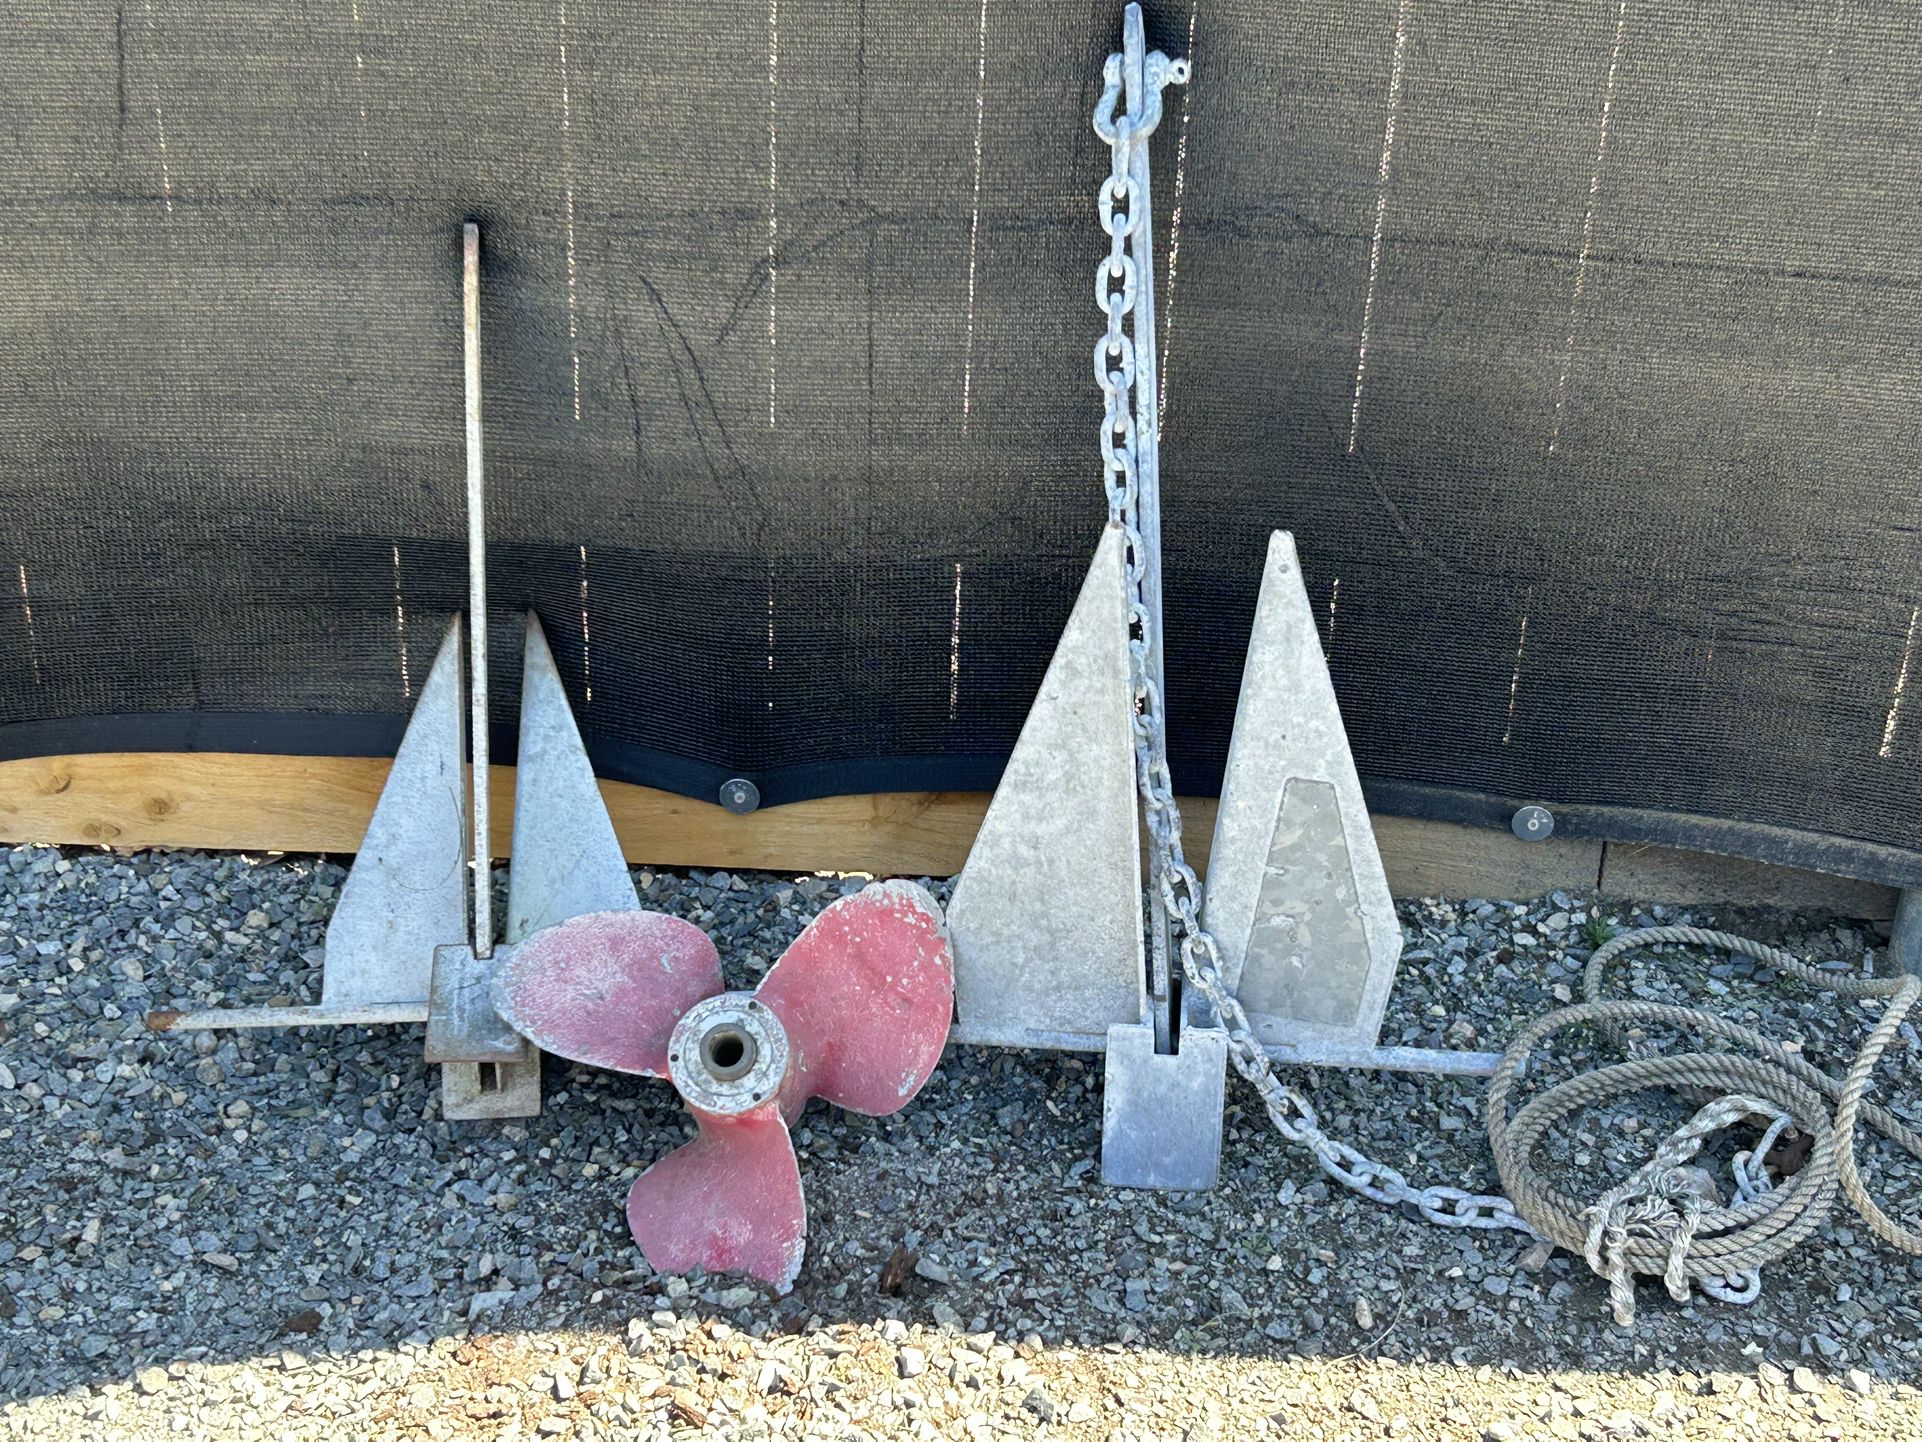 Yard Art Or Use For Boat Anchors